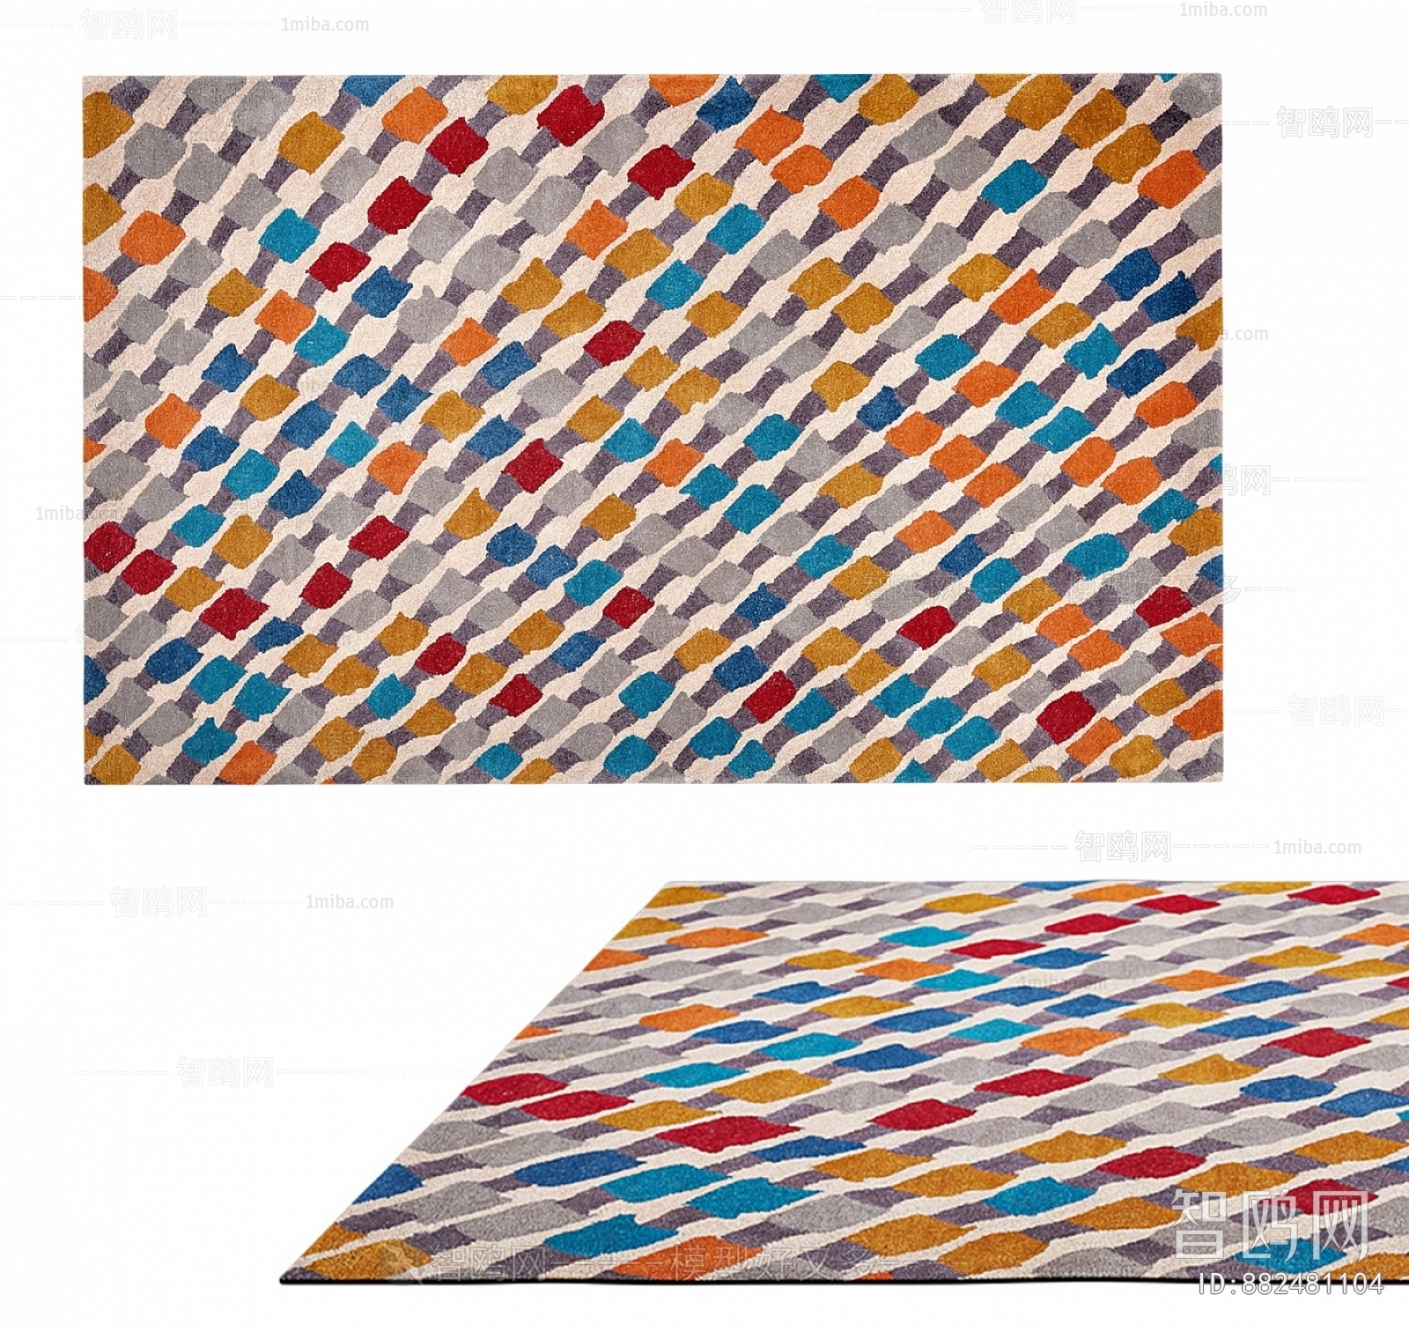 Nordic Style Patterned Carpet